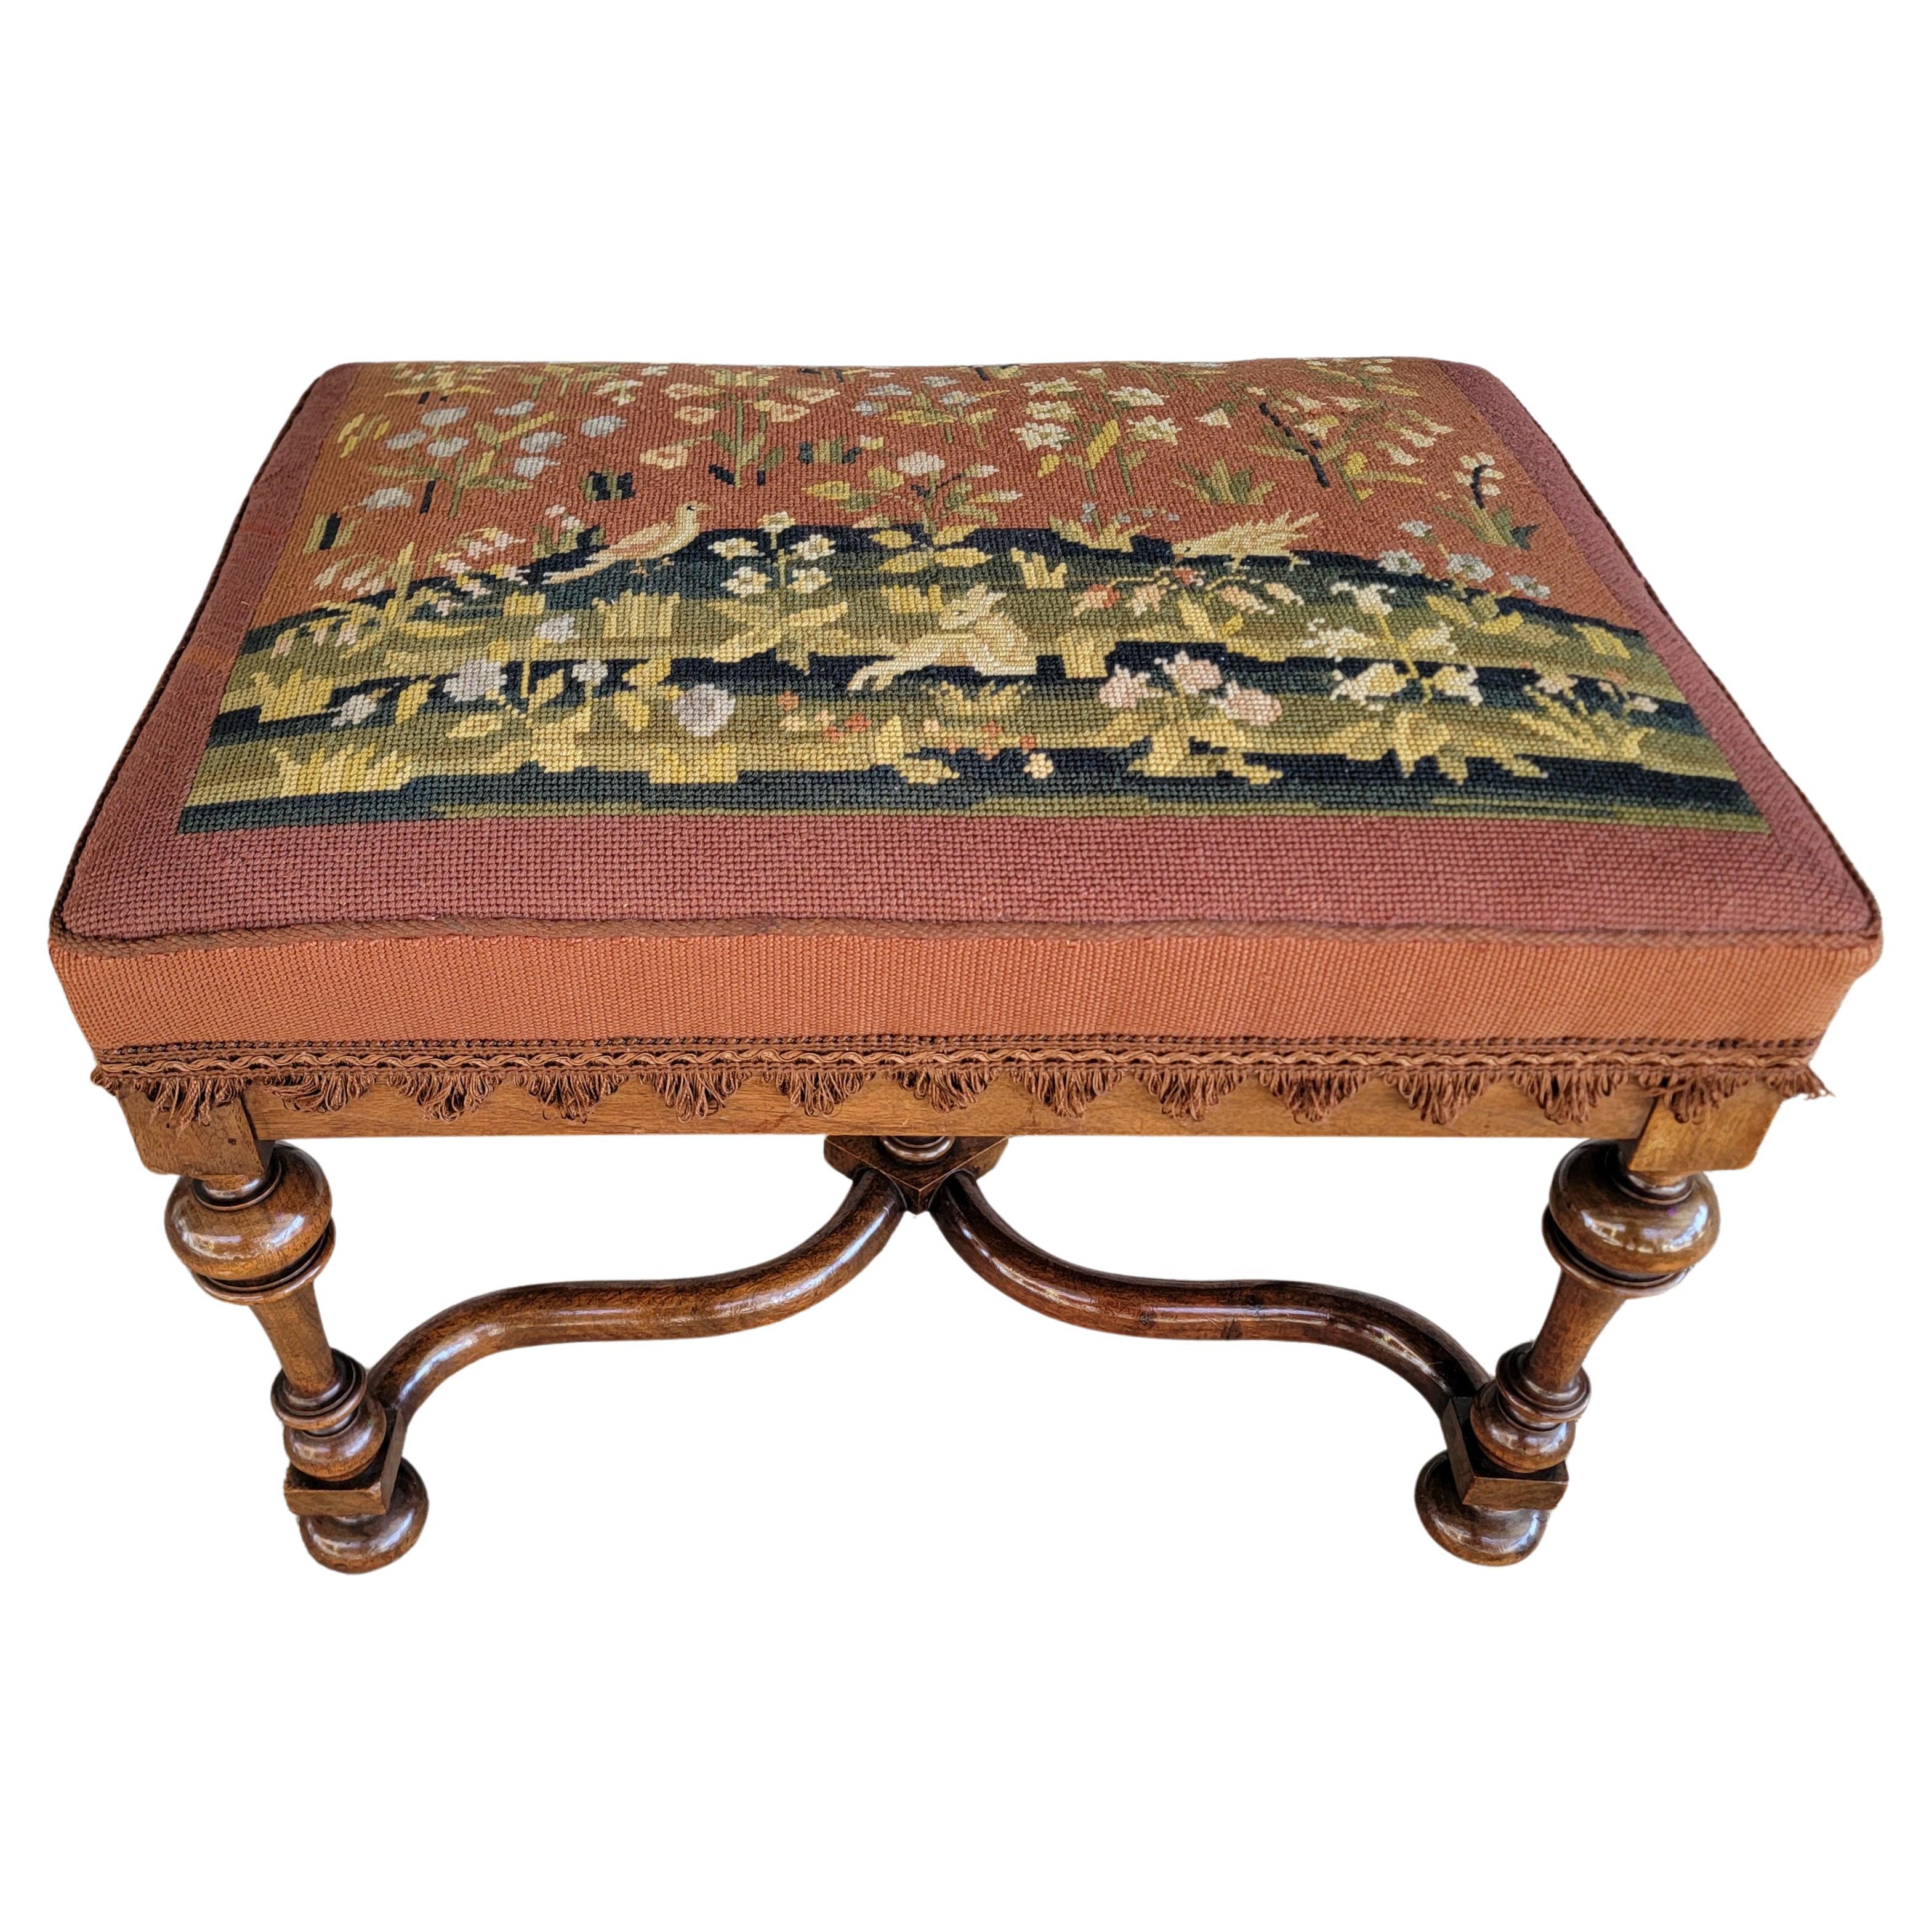 Early 20th Century Needlepoint Footstool / Ottoman For Sale